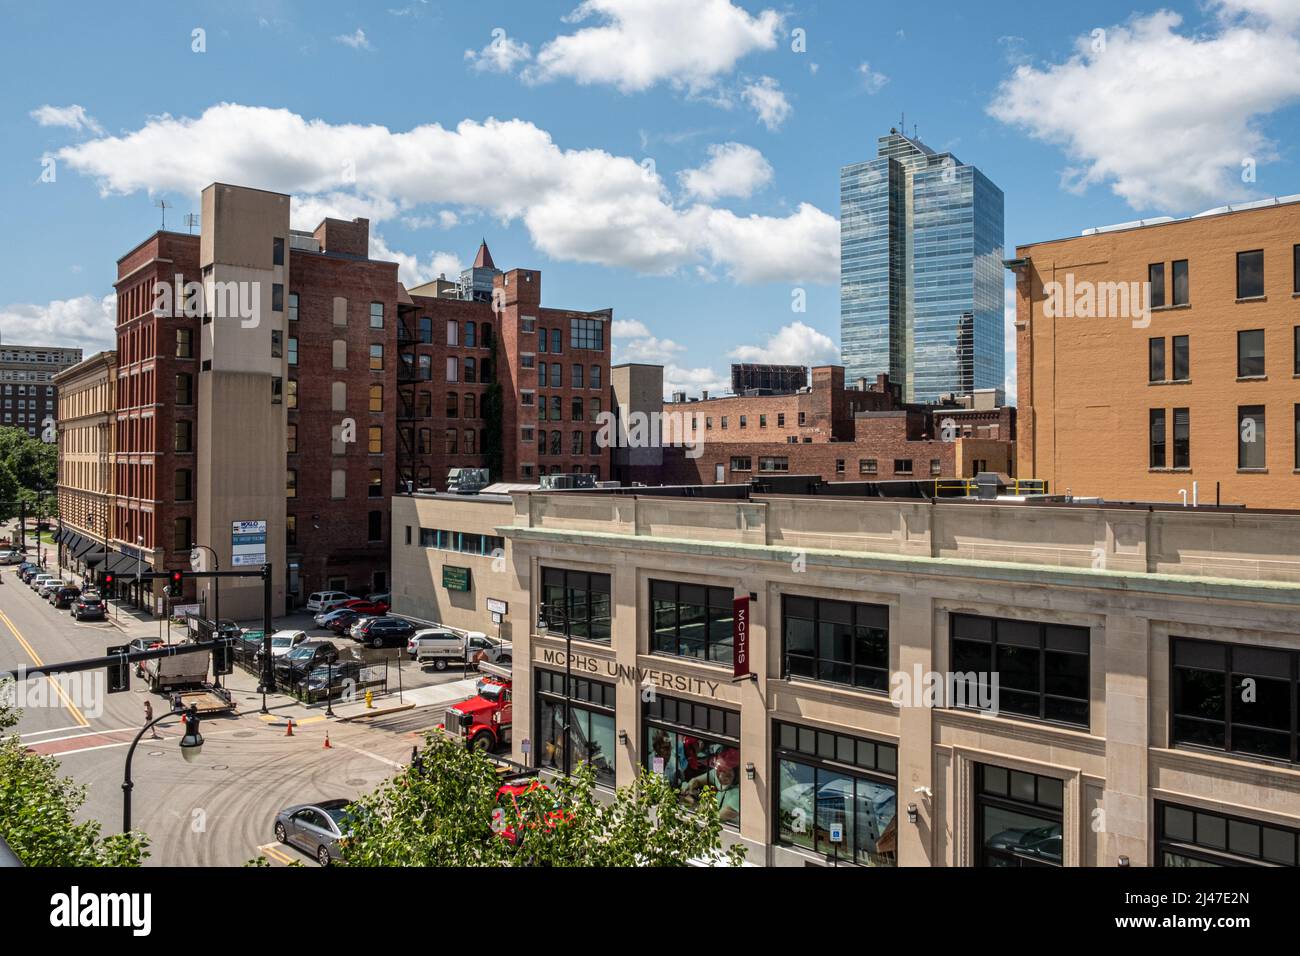 The view from the the parking garage on Commercial Street in Worcester, Massachusetts Stock Photo